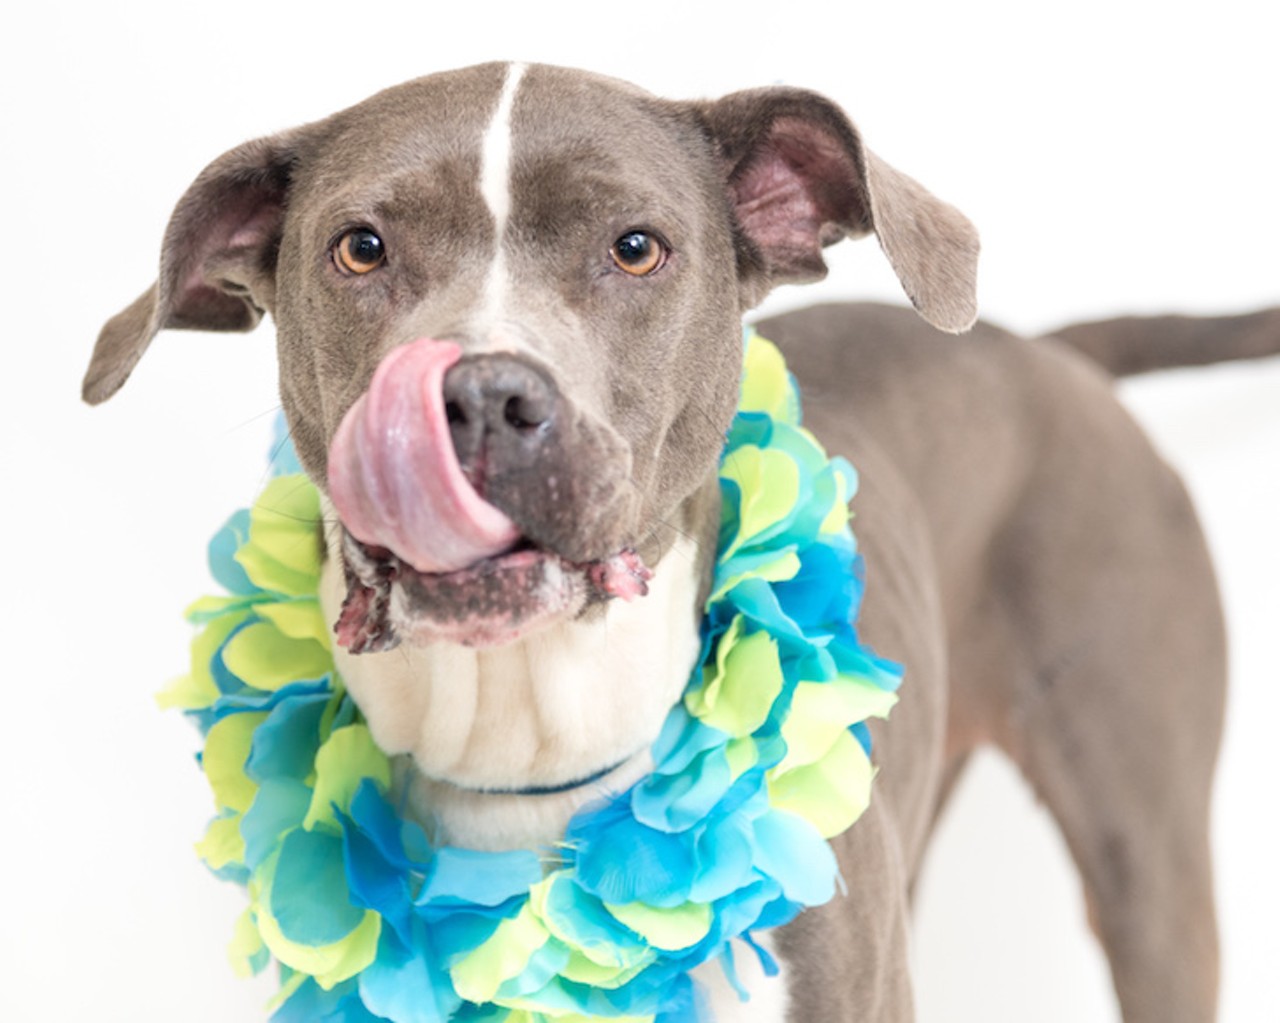 38 adoptable dogs available right now at Orange County Animal Services